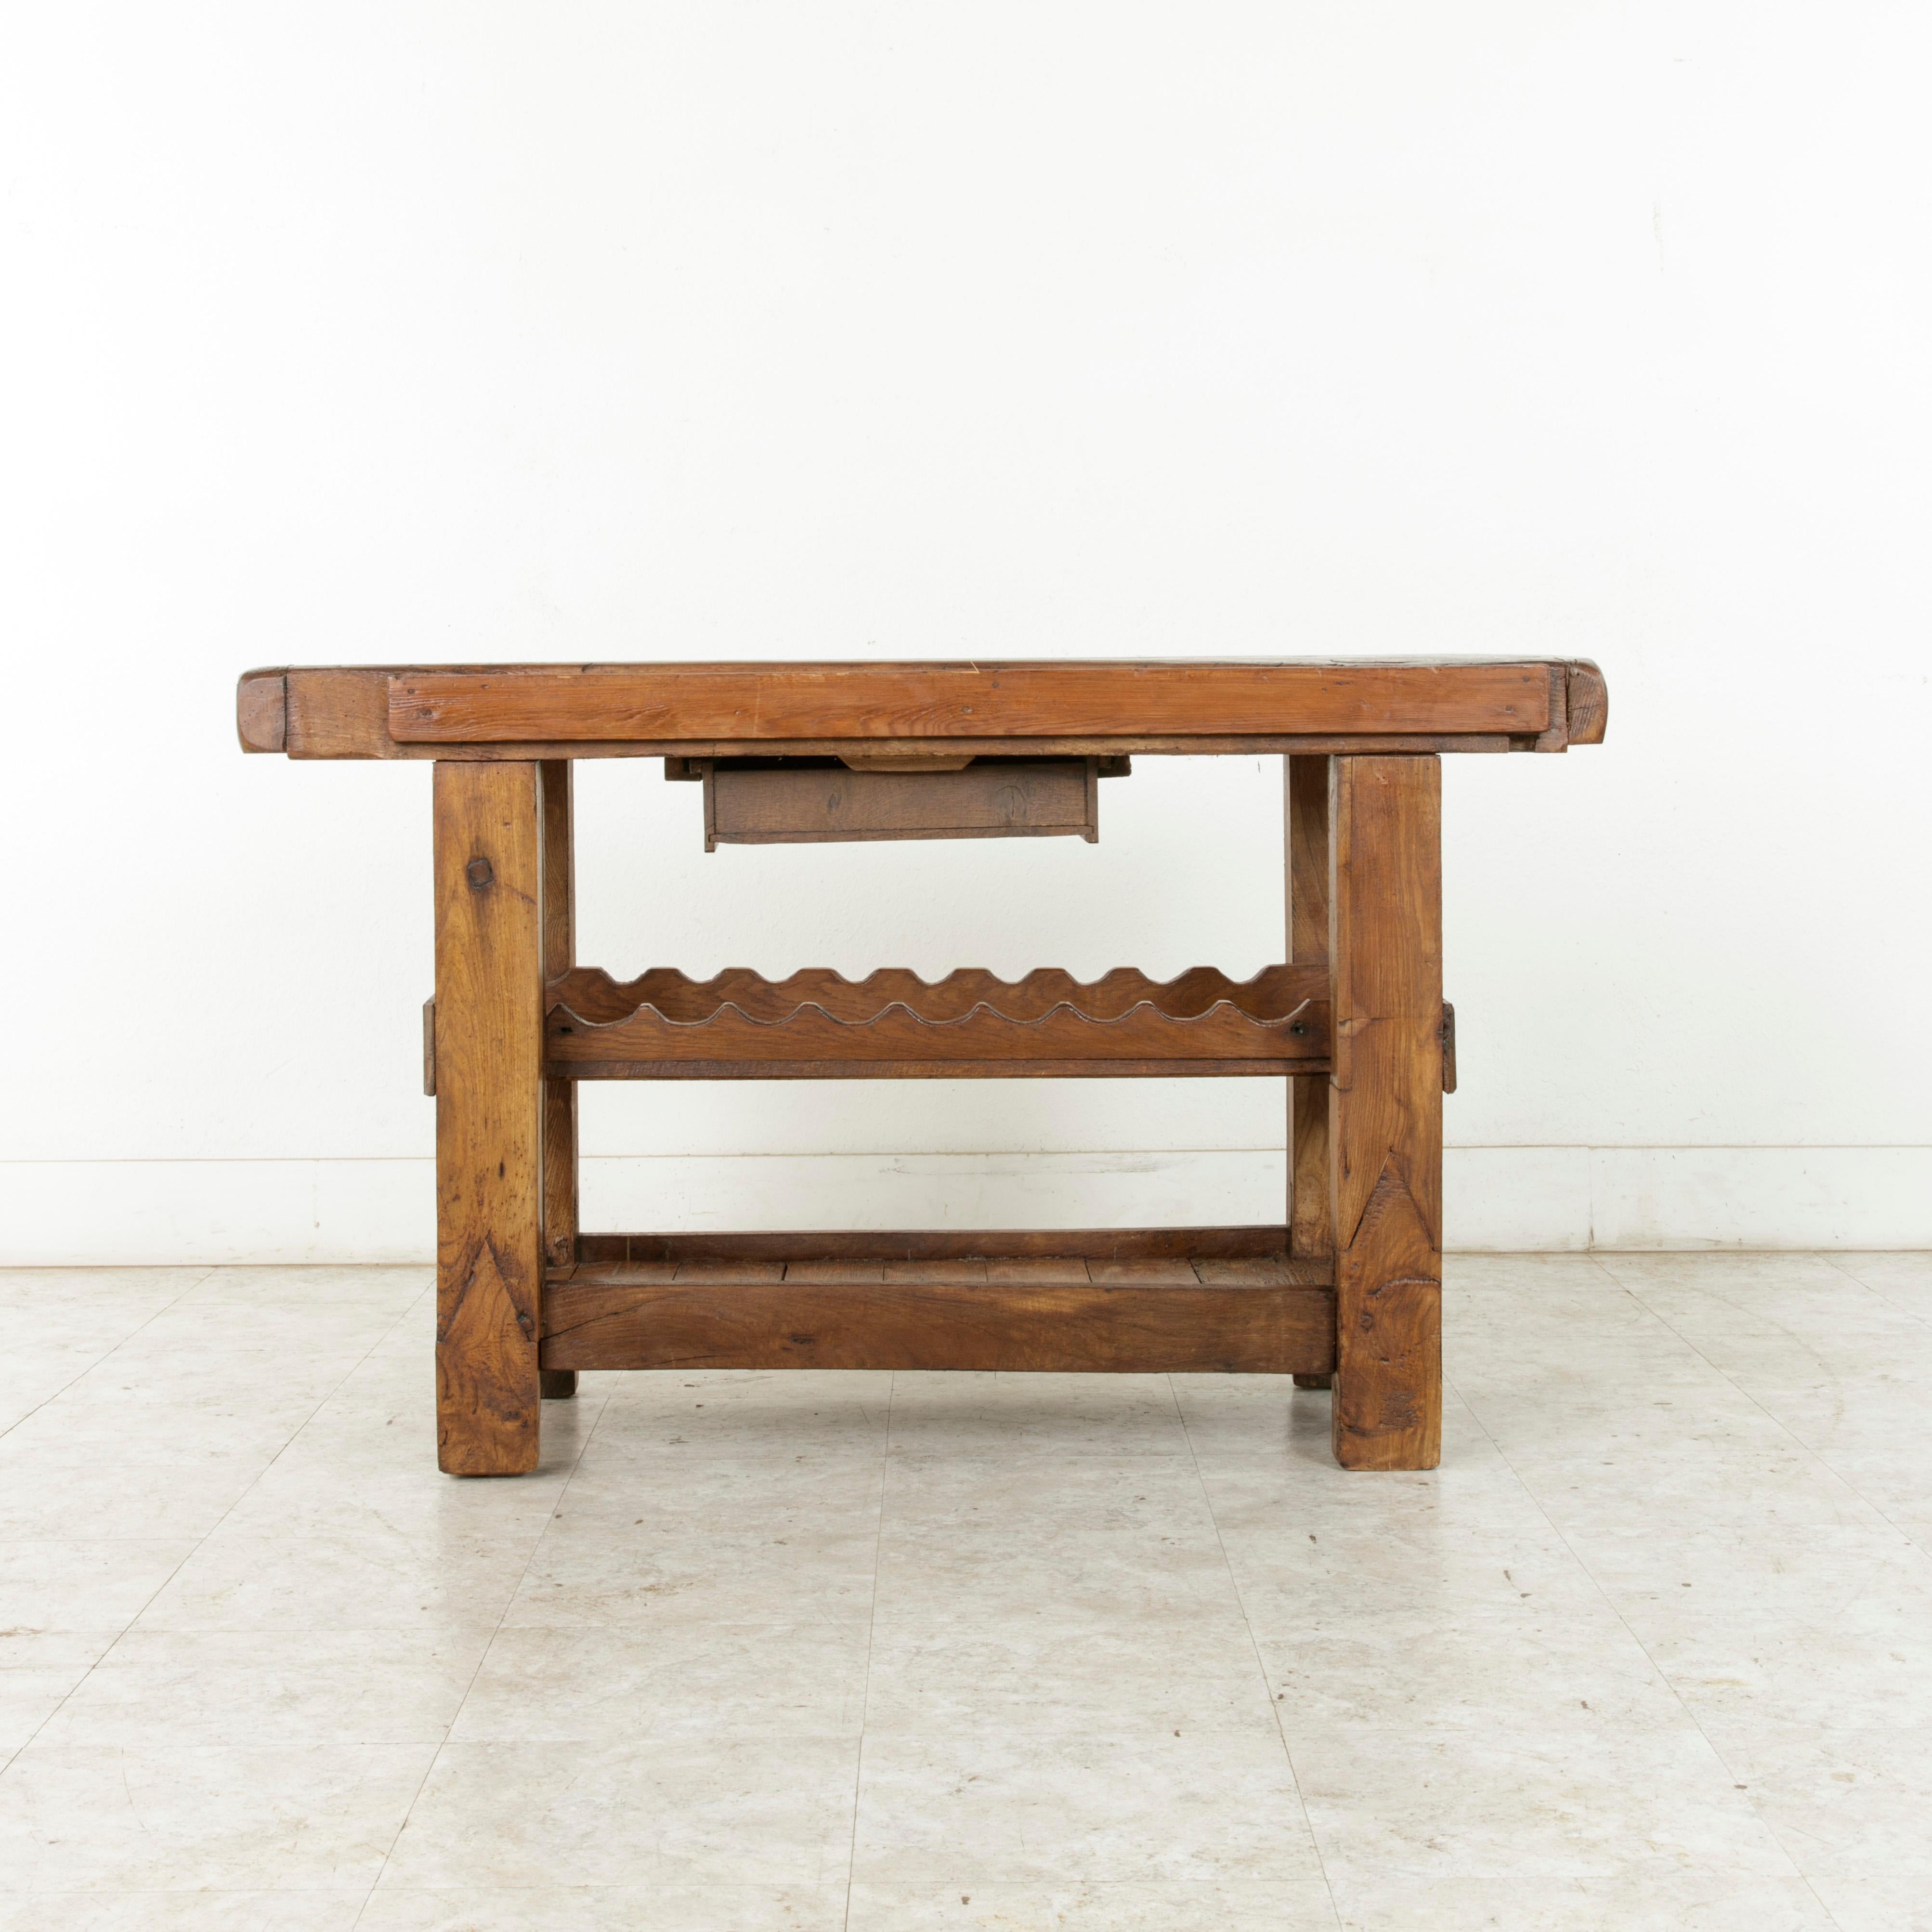 Late 19th Century French Oak Work Bench, Console Table, Sofa Table, or Dry Bar 1